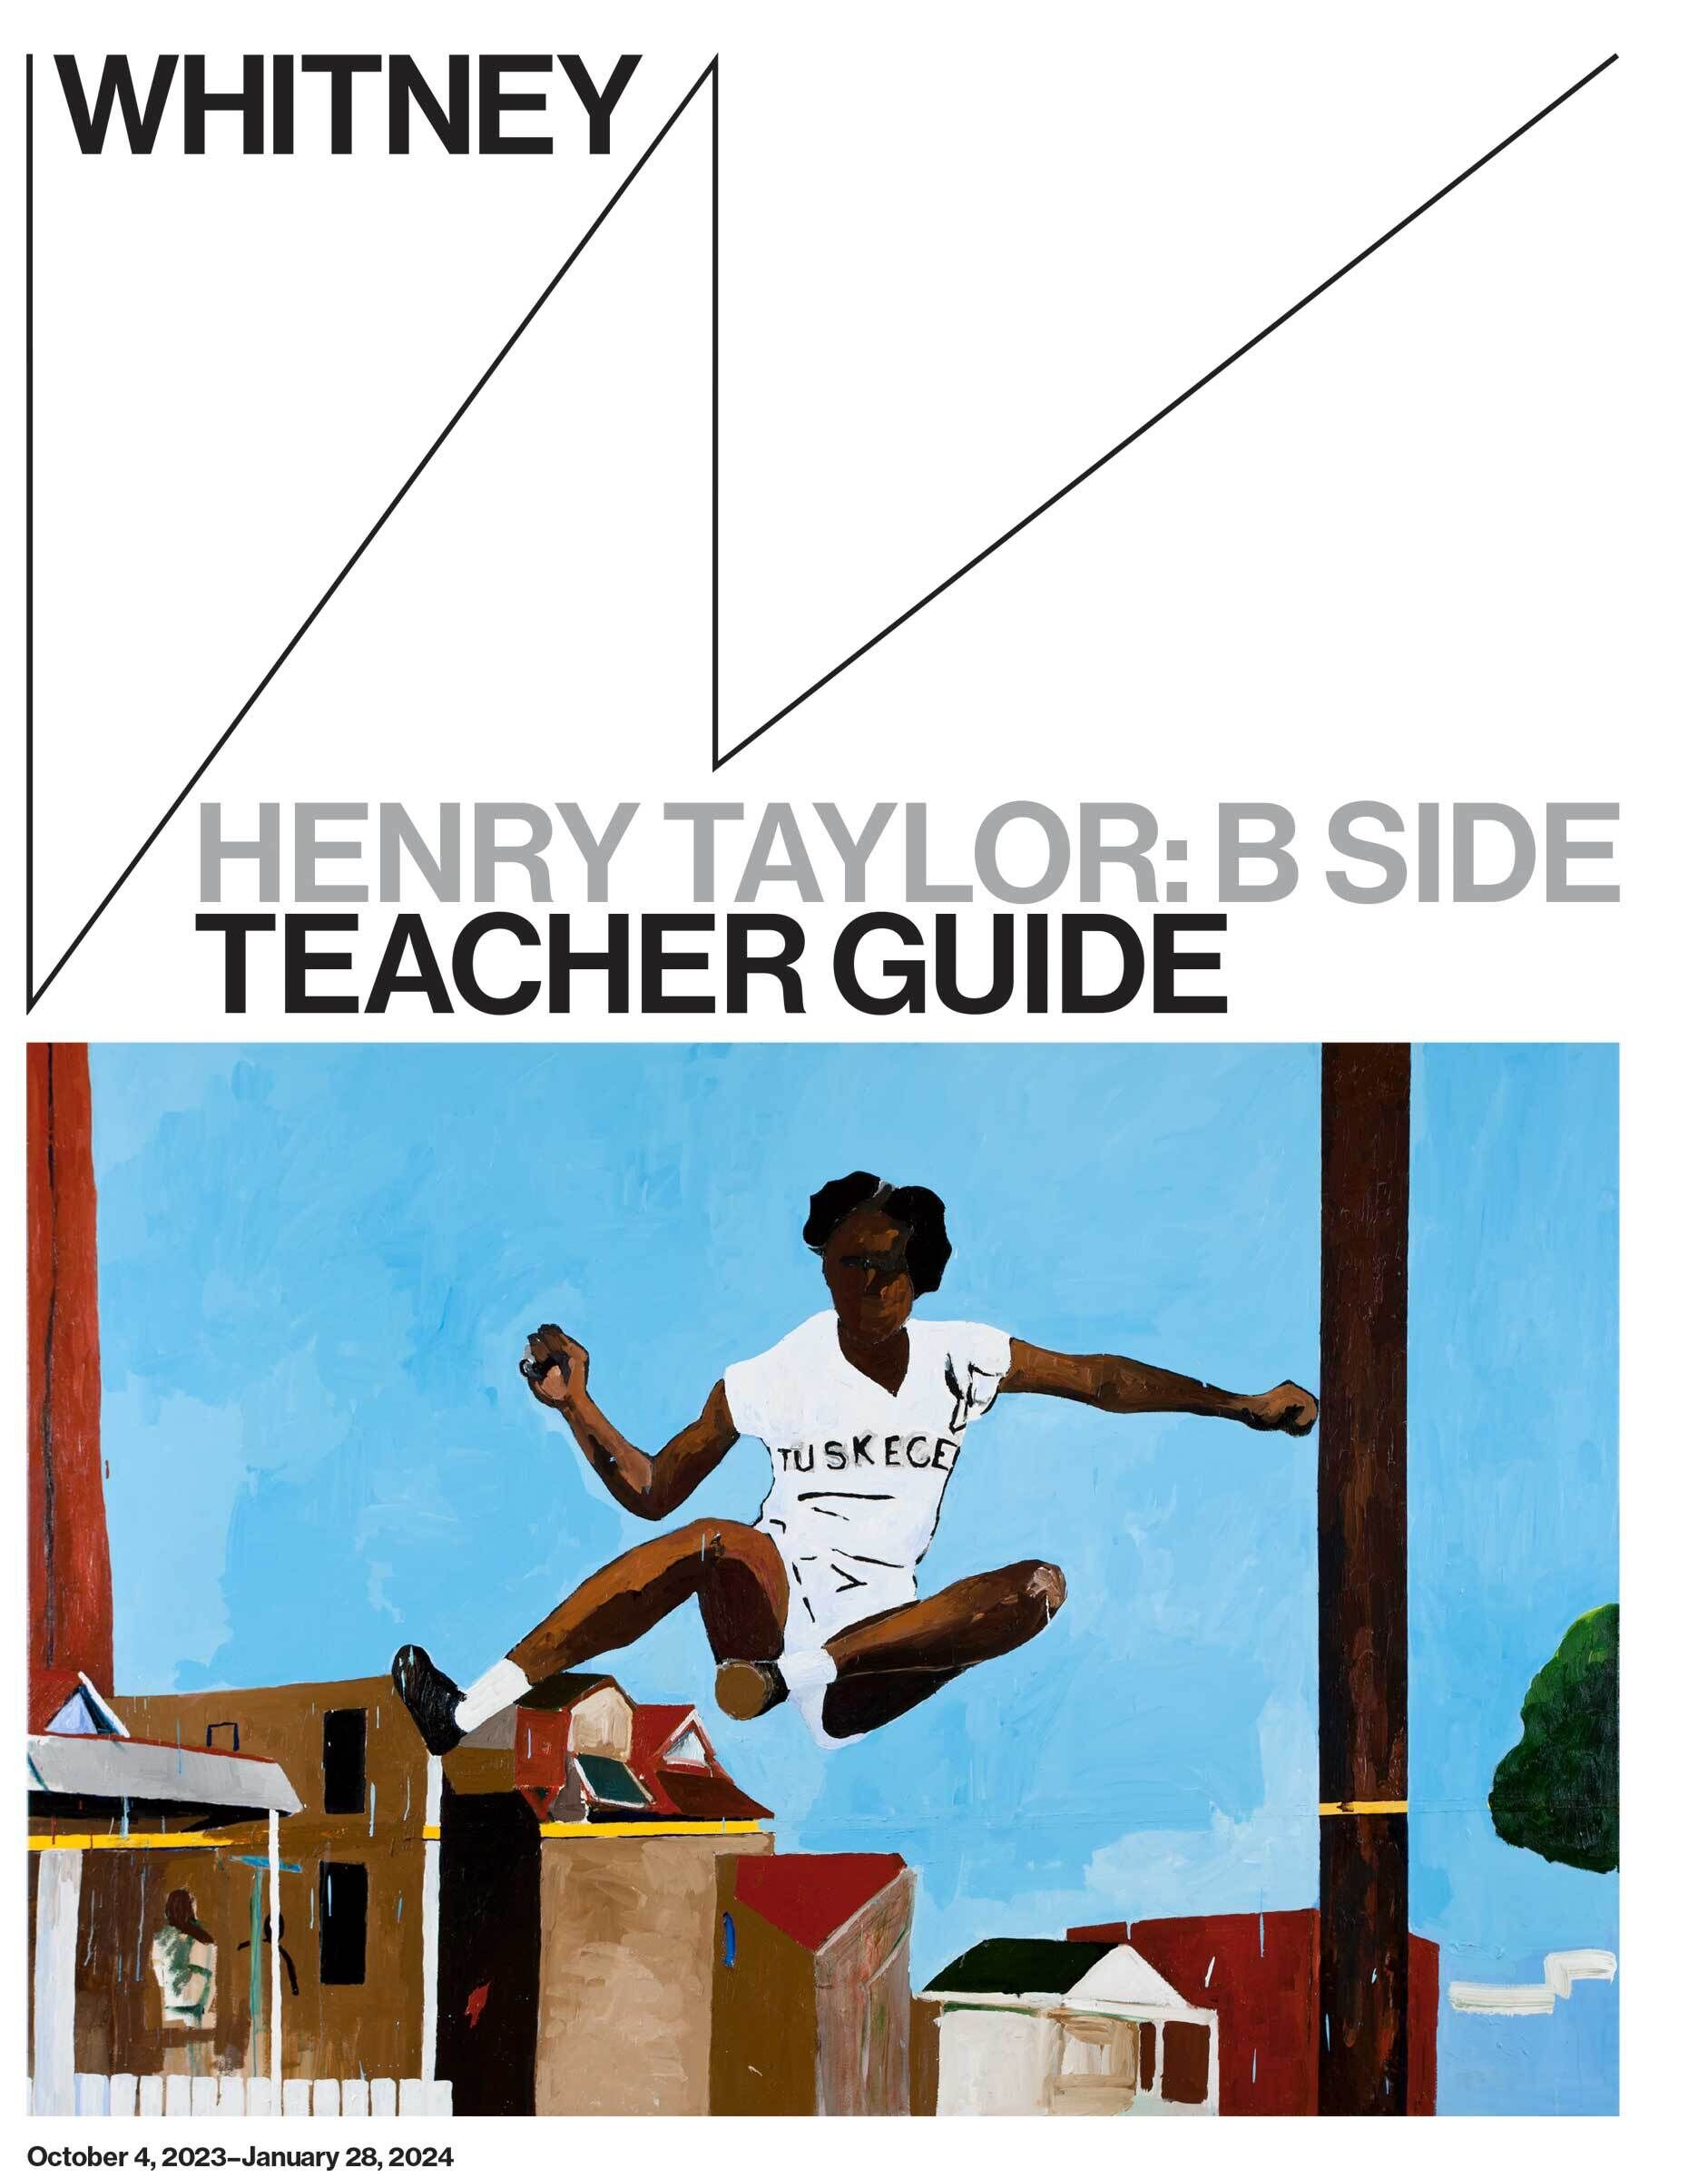 A painting of a hurdle jumper with the uniform Tuskegee and above is the Whitney's logo with the words Henry Taylor B Side Teacher Guide.